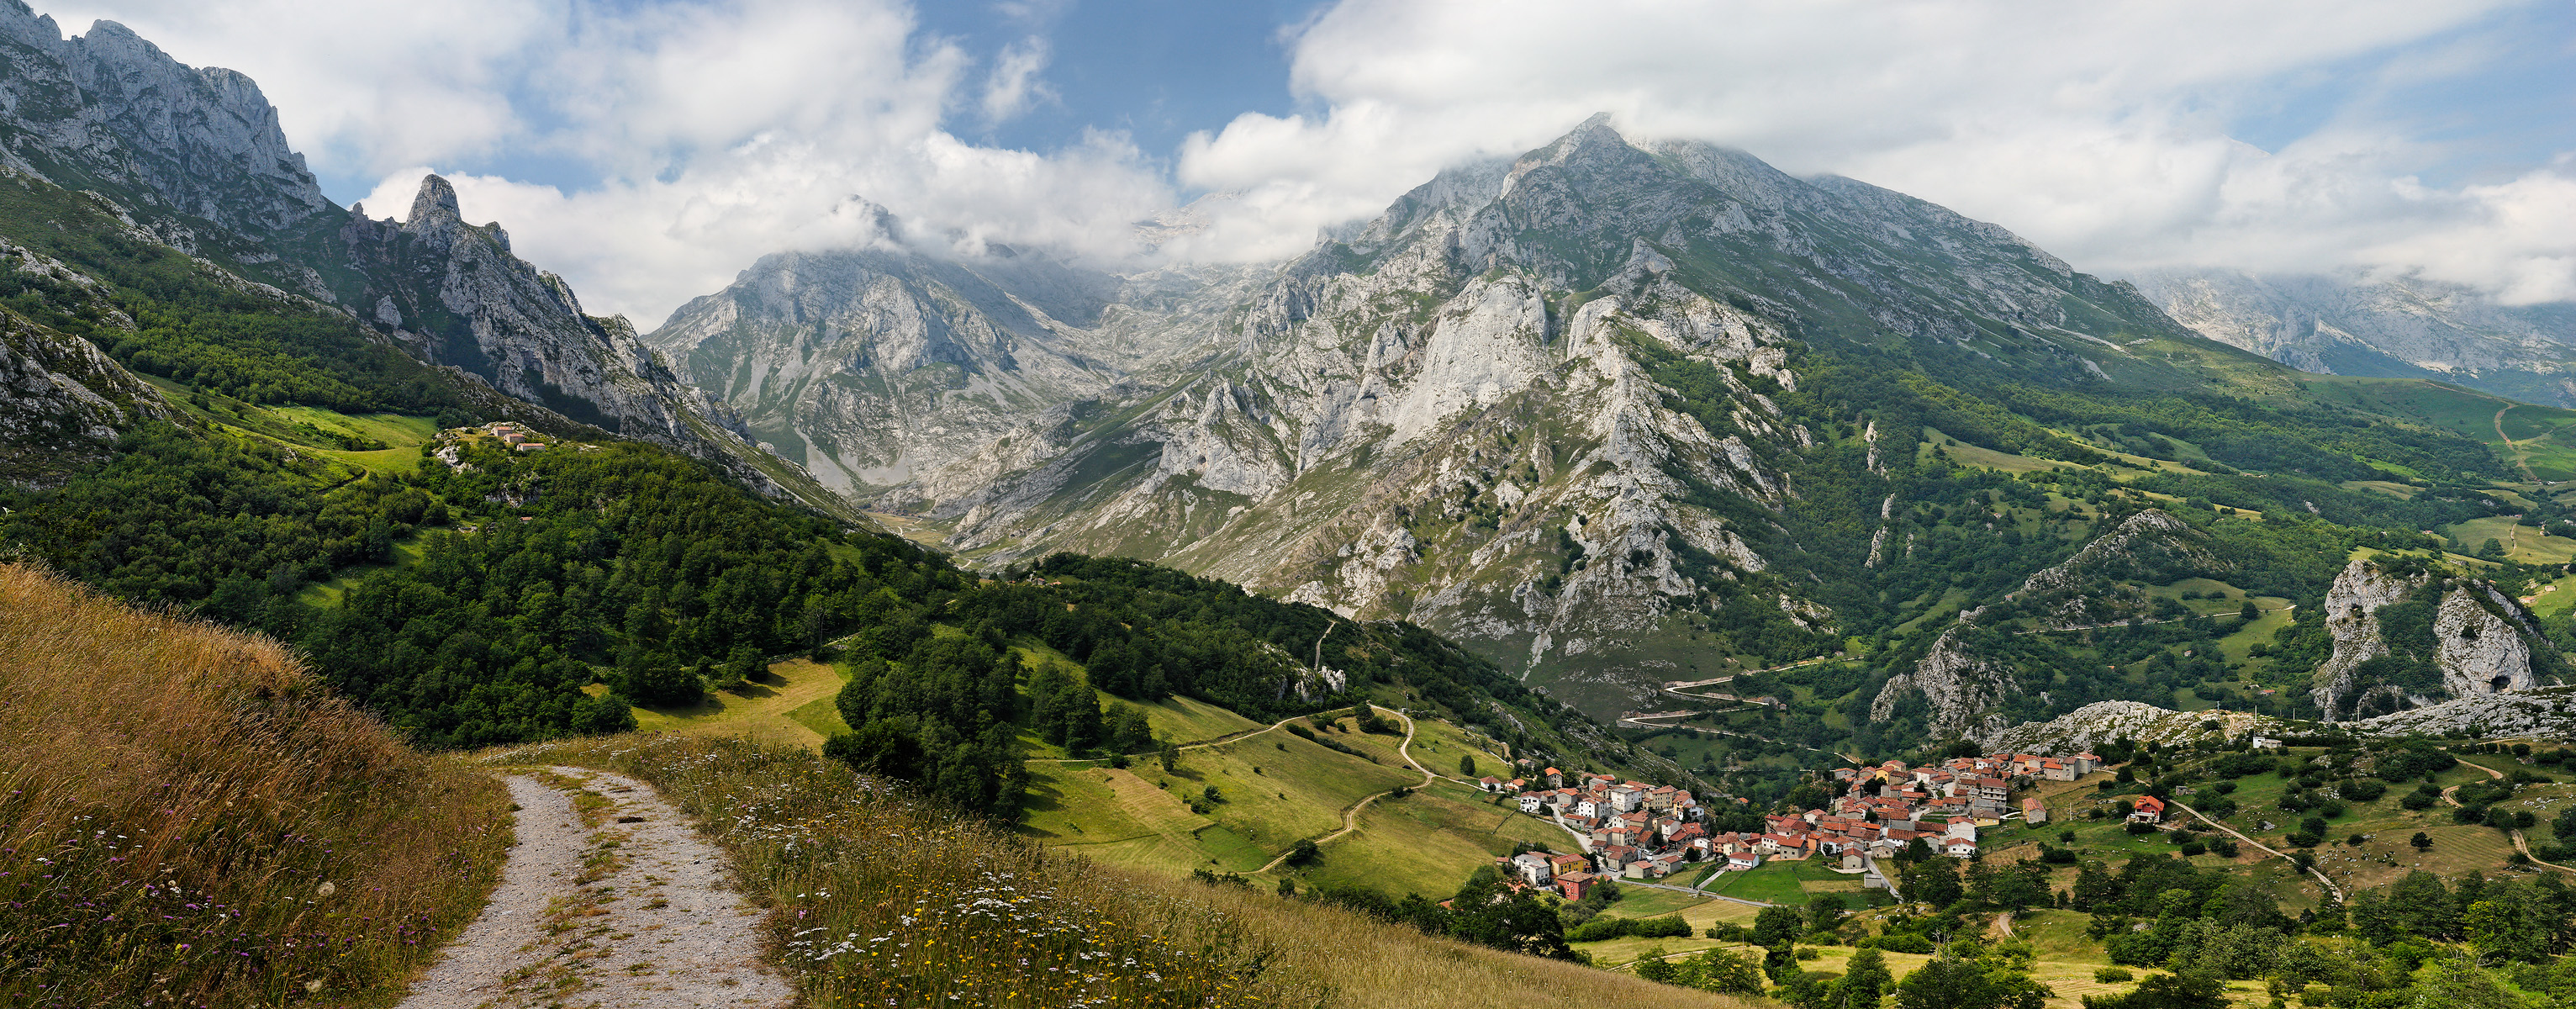 Picos de Europa, must visit mountains in Spain